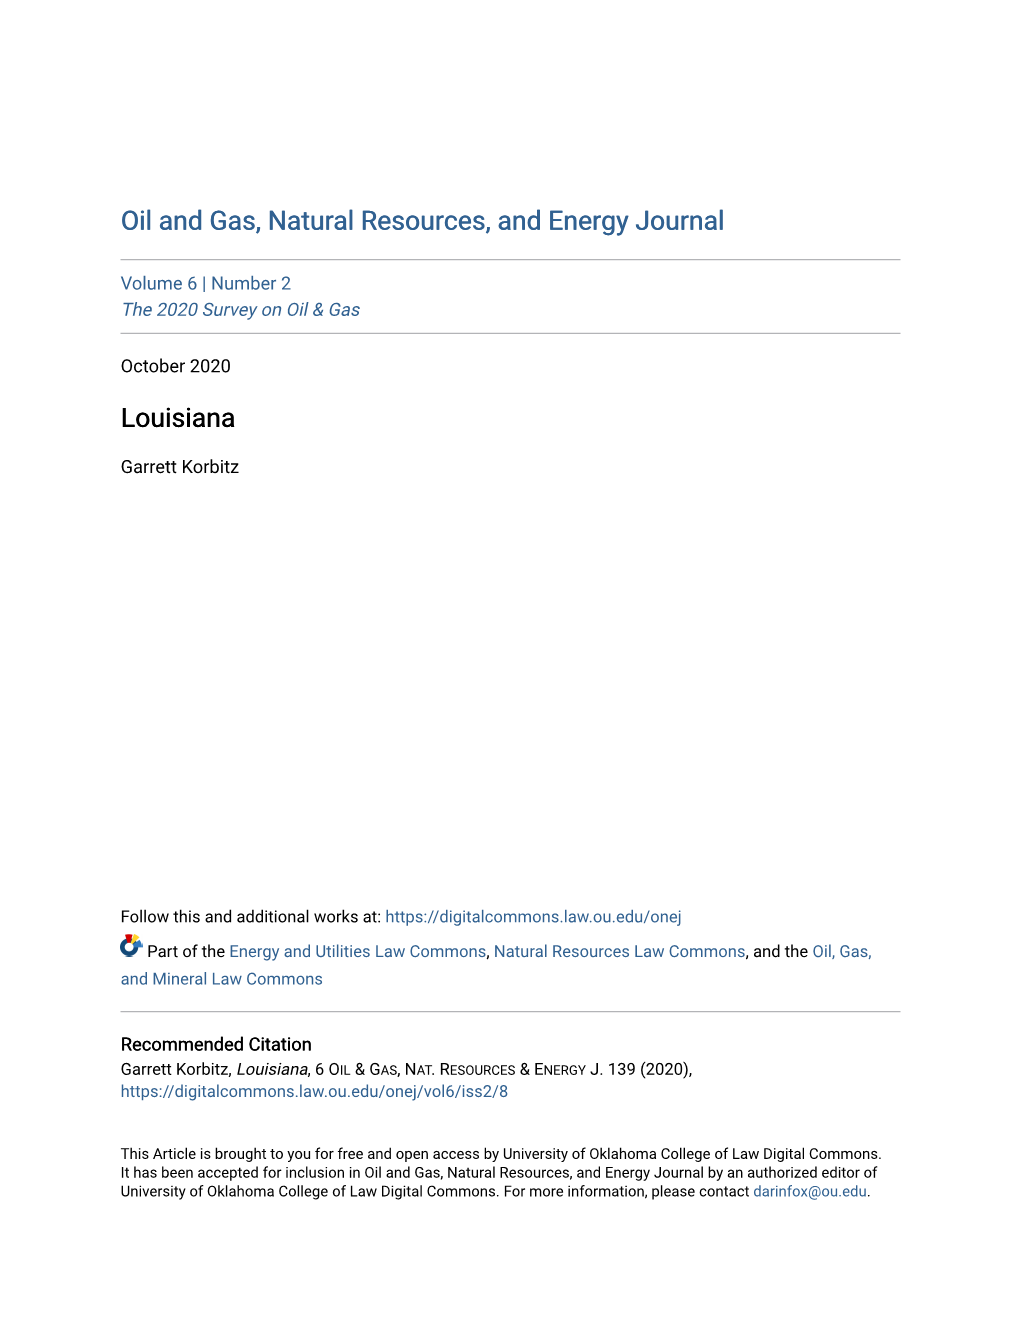 Oil and Gas, Natural Resources, and Energy Journal Louisiana